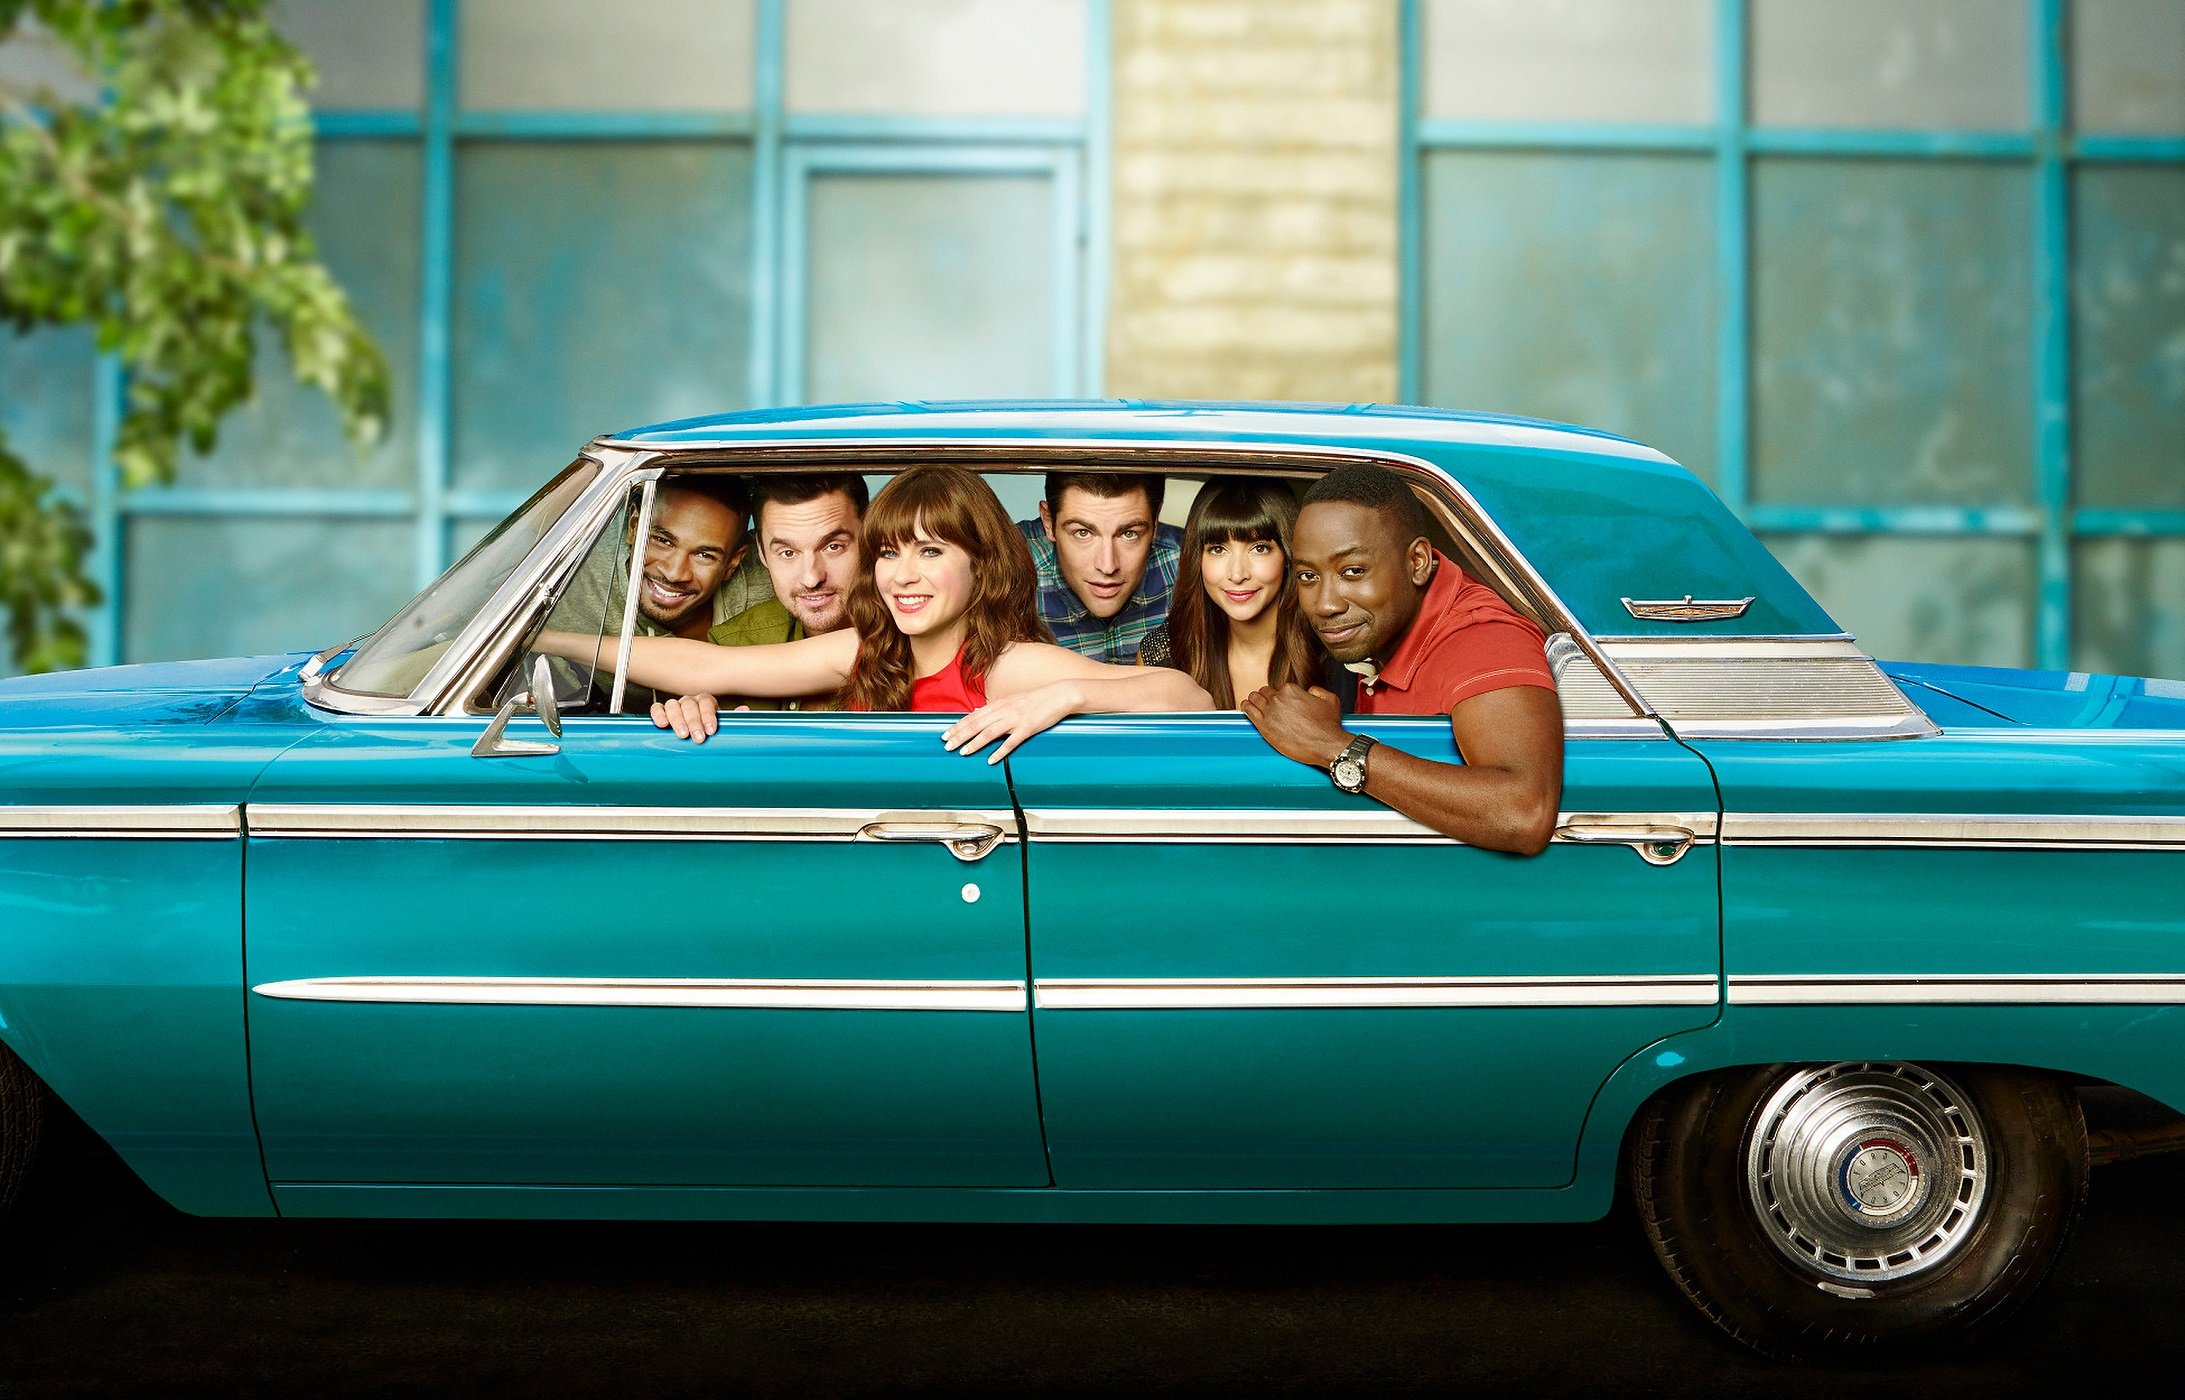 Damon Wayans, Jr., Jake Johnson, Zooey Deschanel, Max Greenfield, Hannah Simone, and Lamorne Morris appear in promotional photos for 'New Girl'